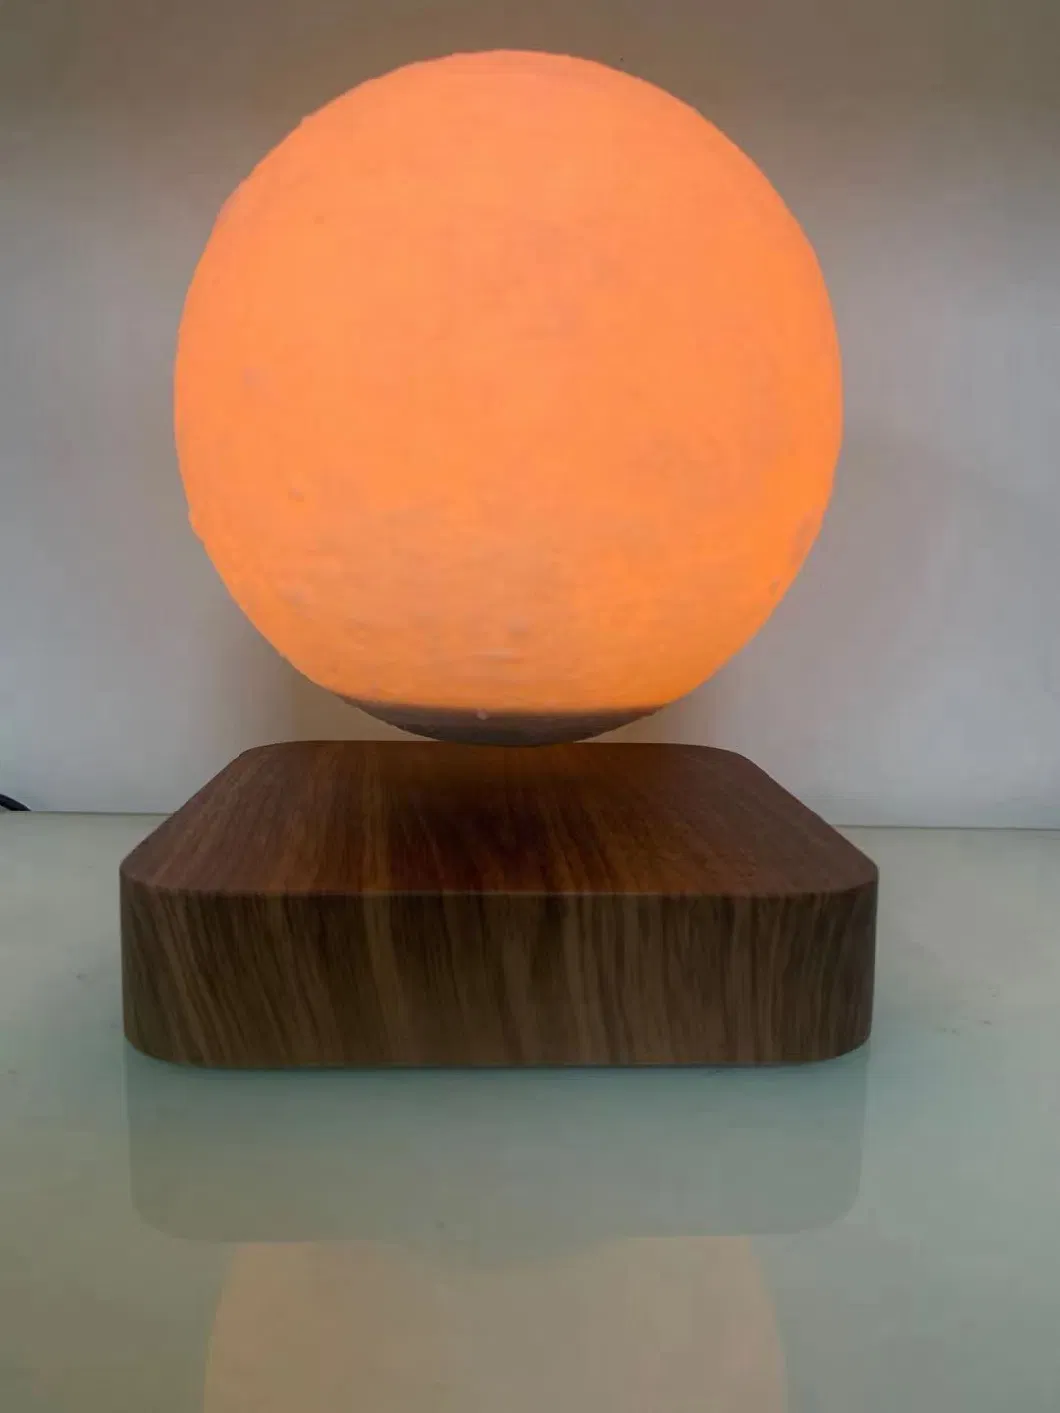 New Creative Magnetic Levitation Floating Moon Lamp 6inch Night Light for Decor Holiday Gift Christmas